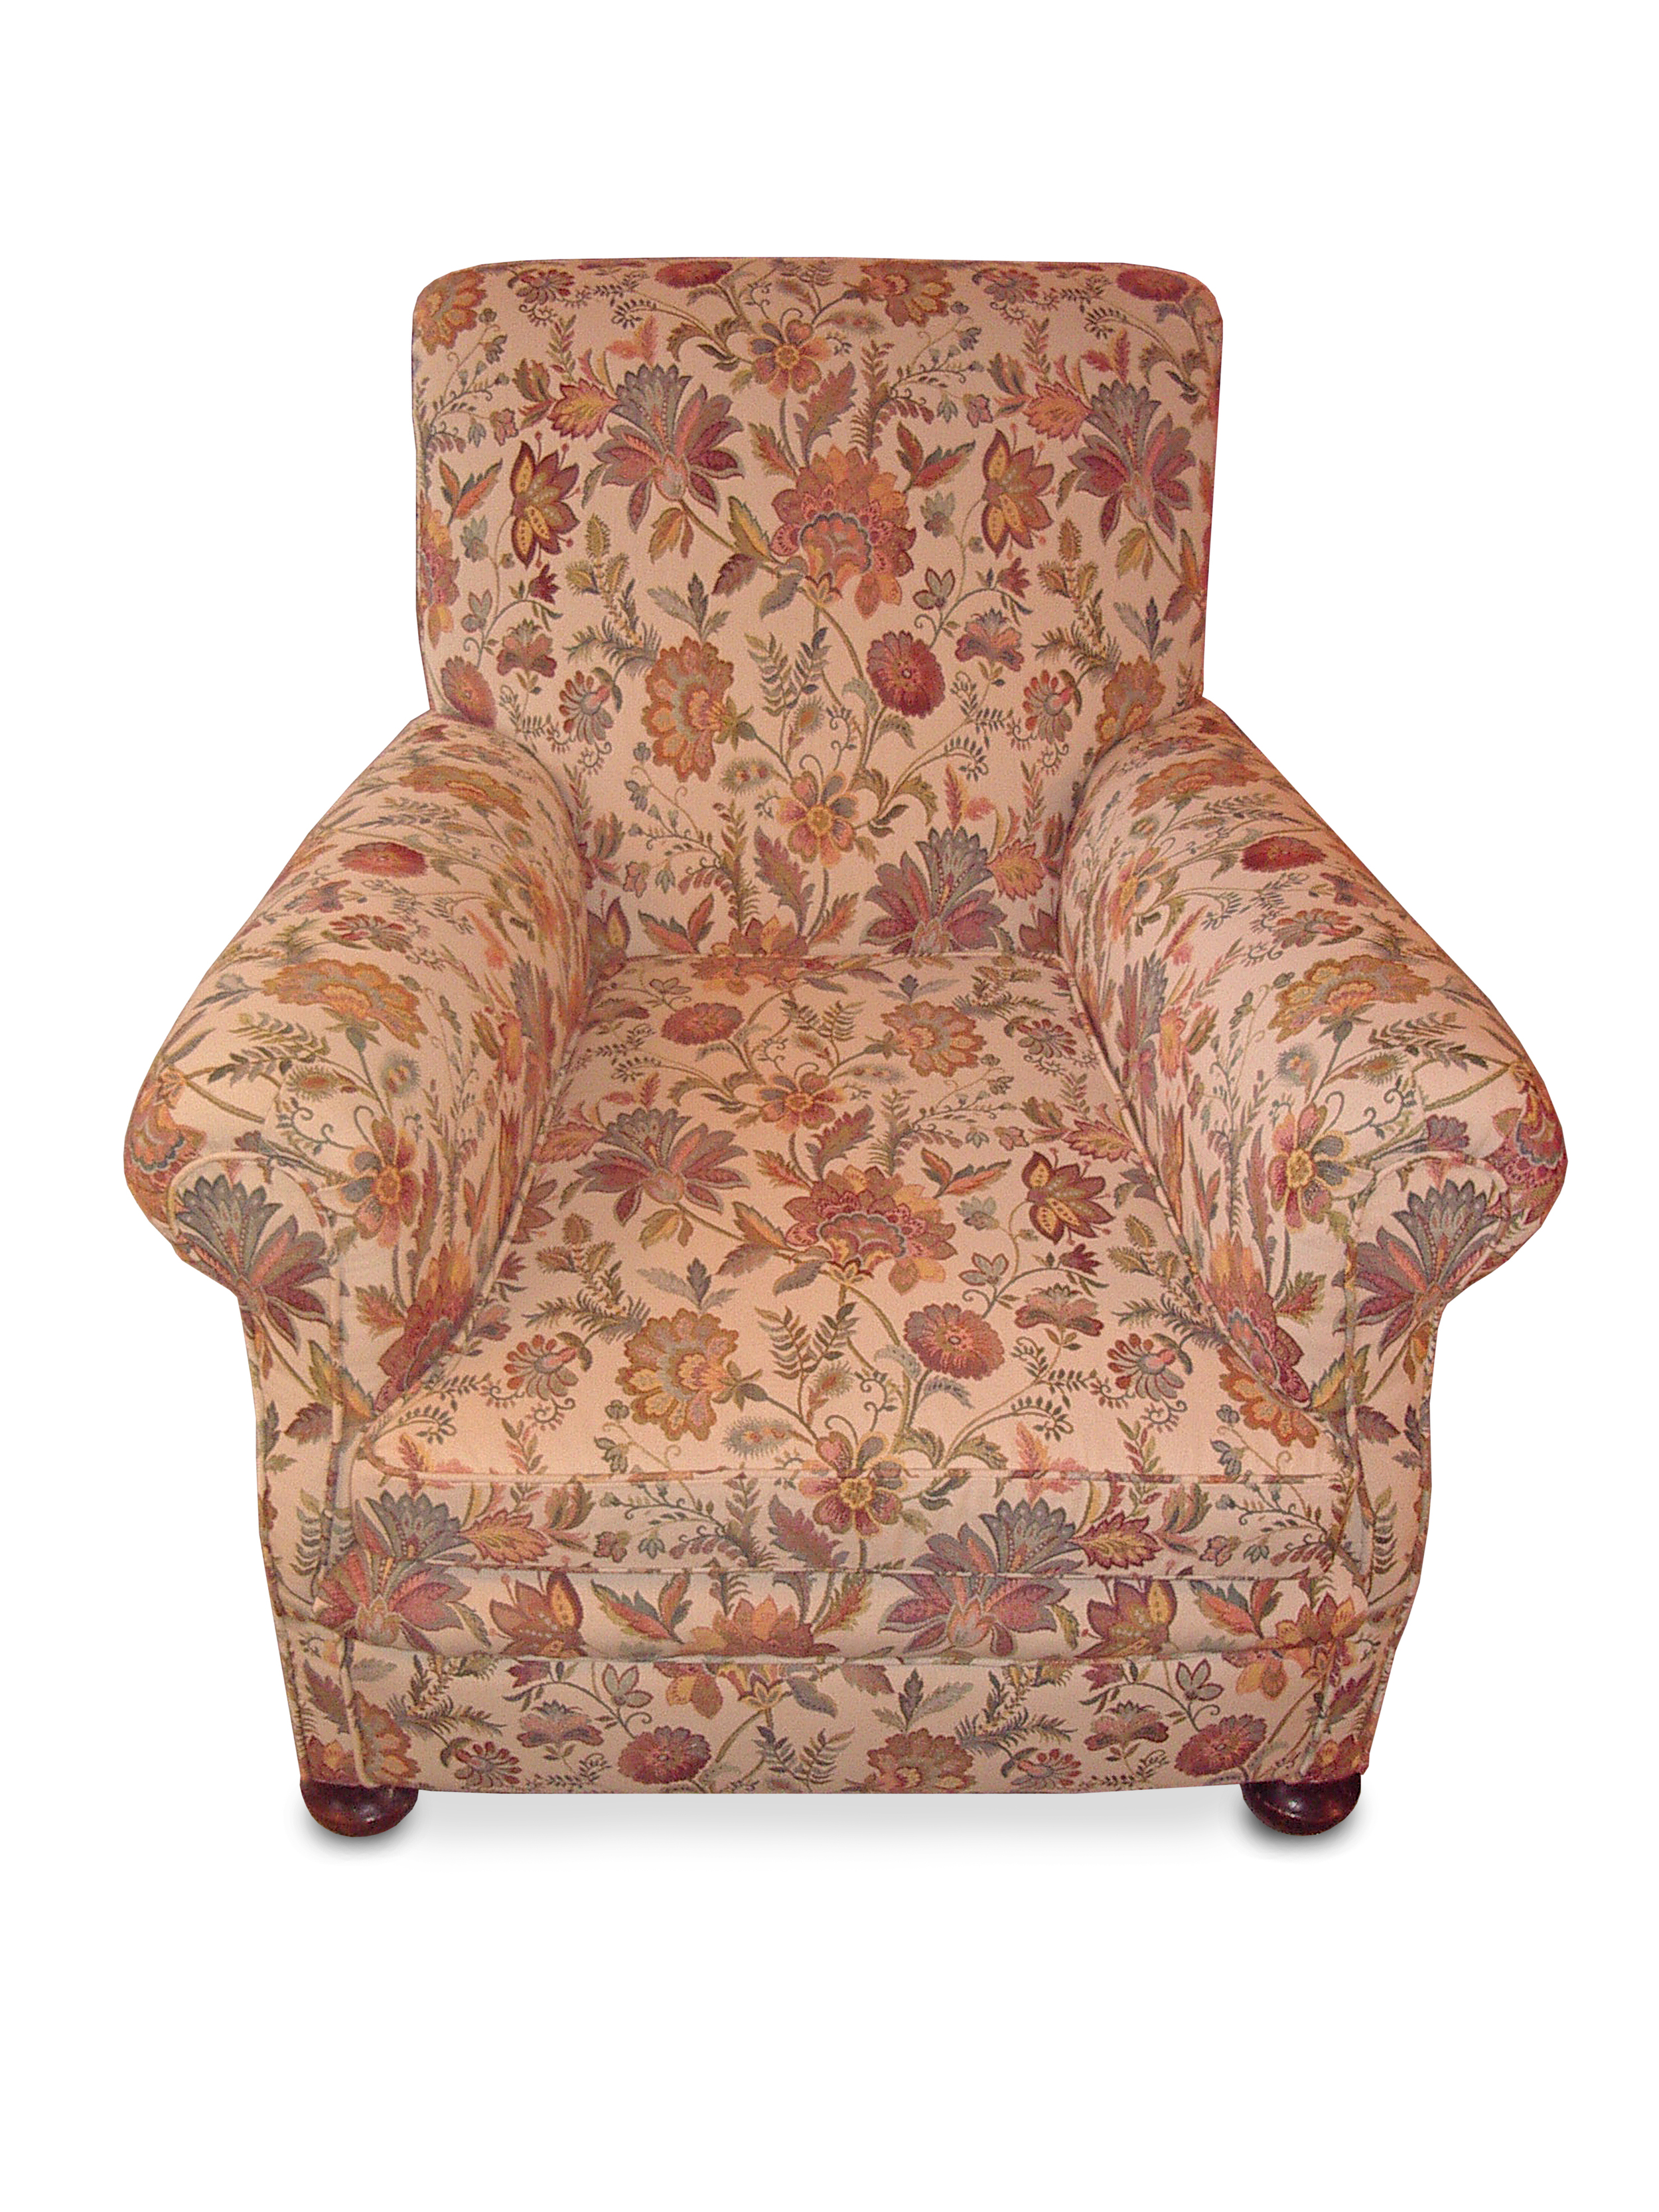  Classic armchair in striking flower pattern fabric&nbsp;running throughout&nbsp;the chair, stitched facing arms and feather/down cushion with bun feet 